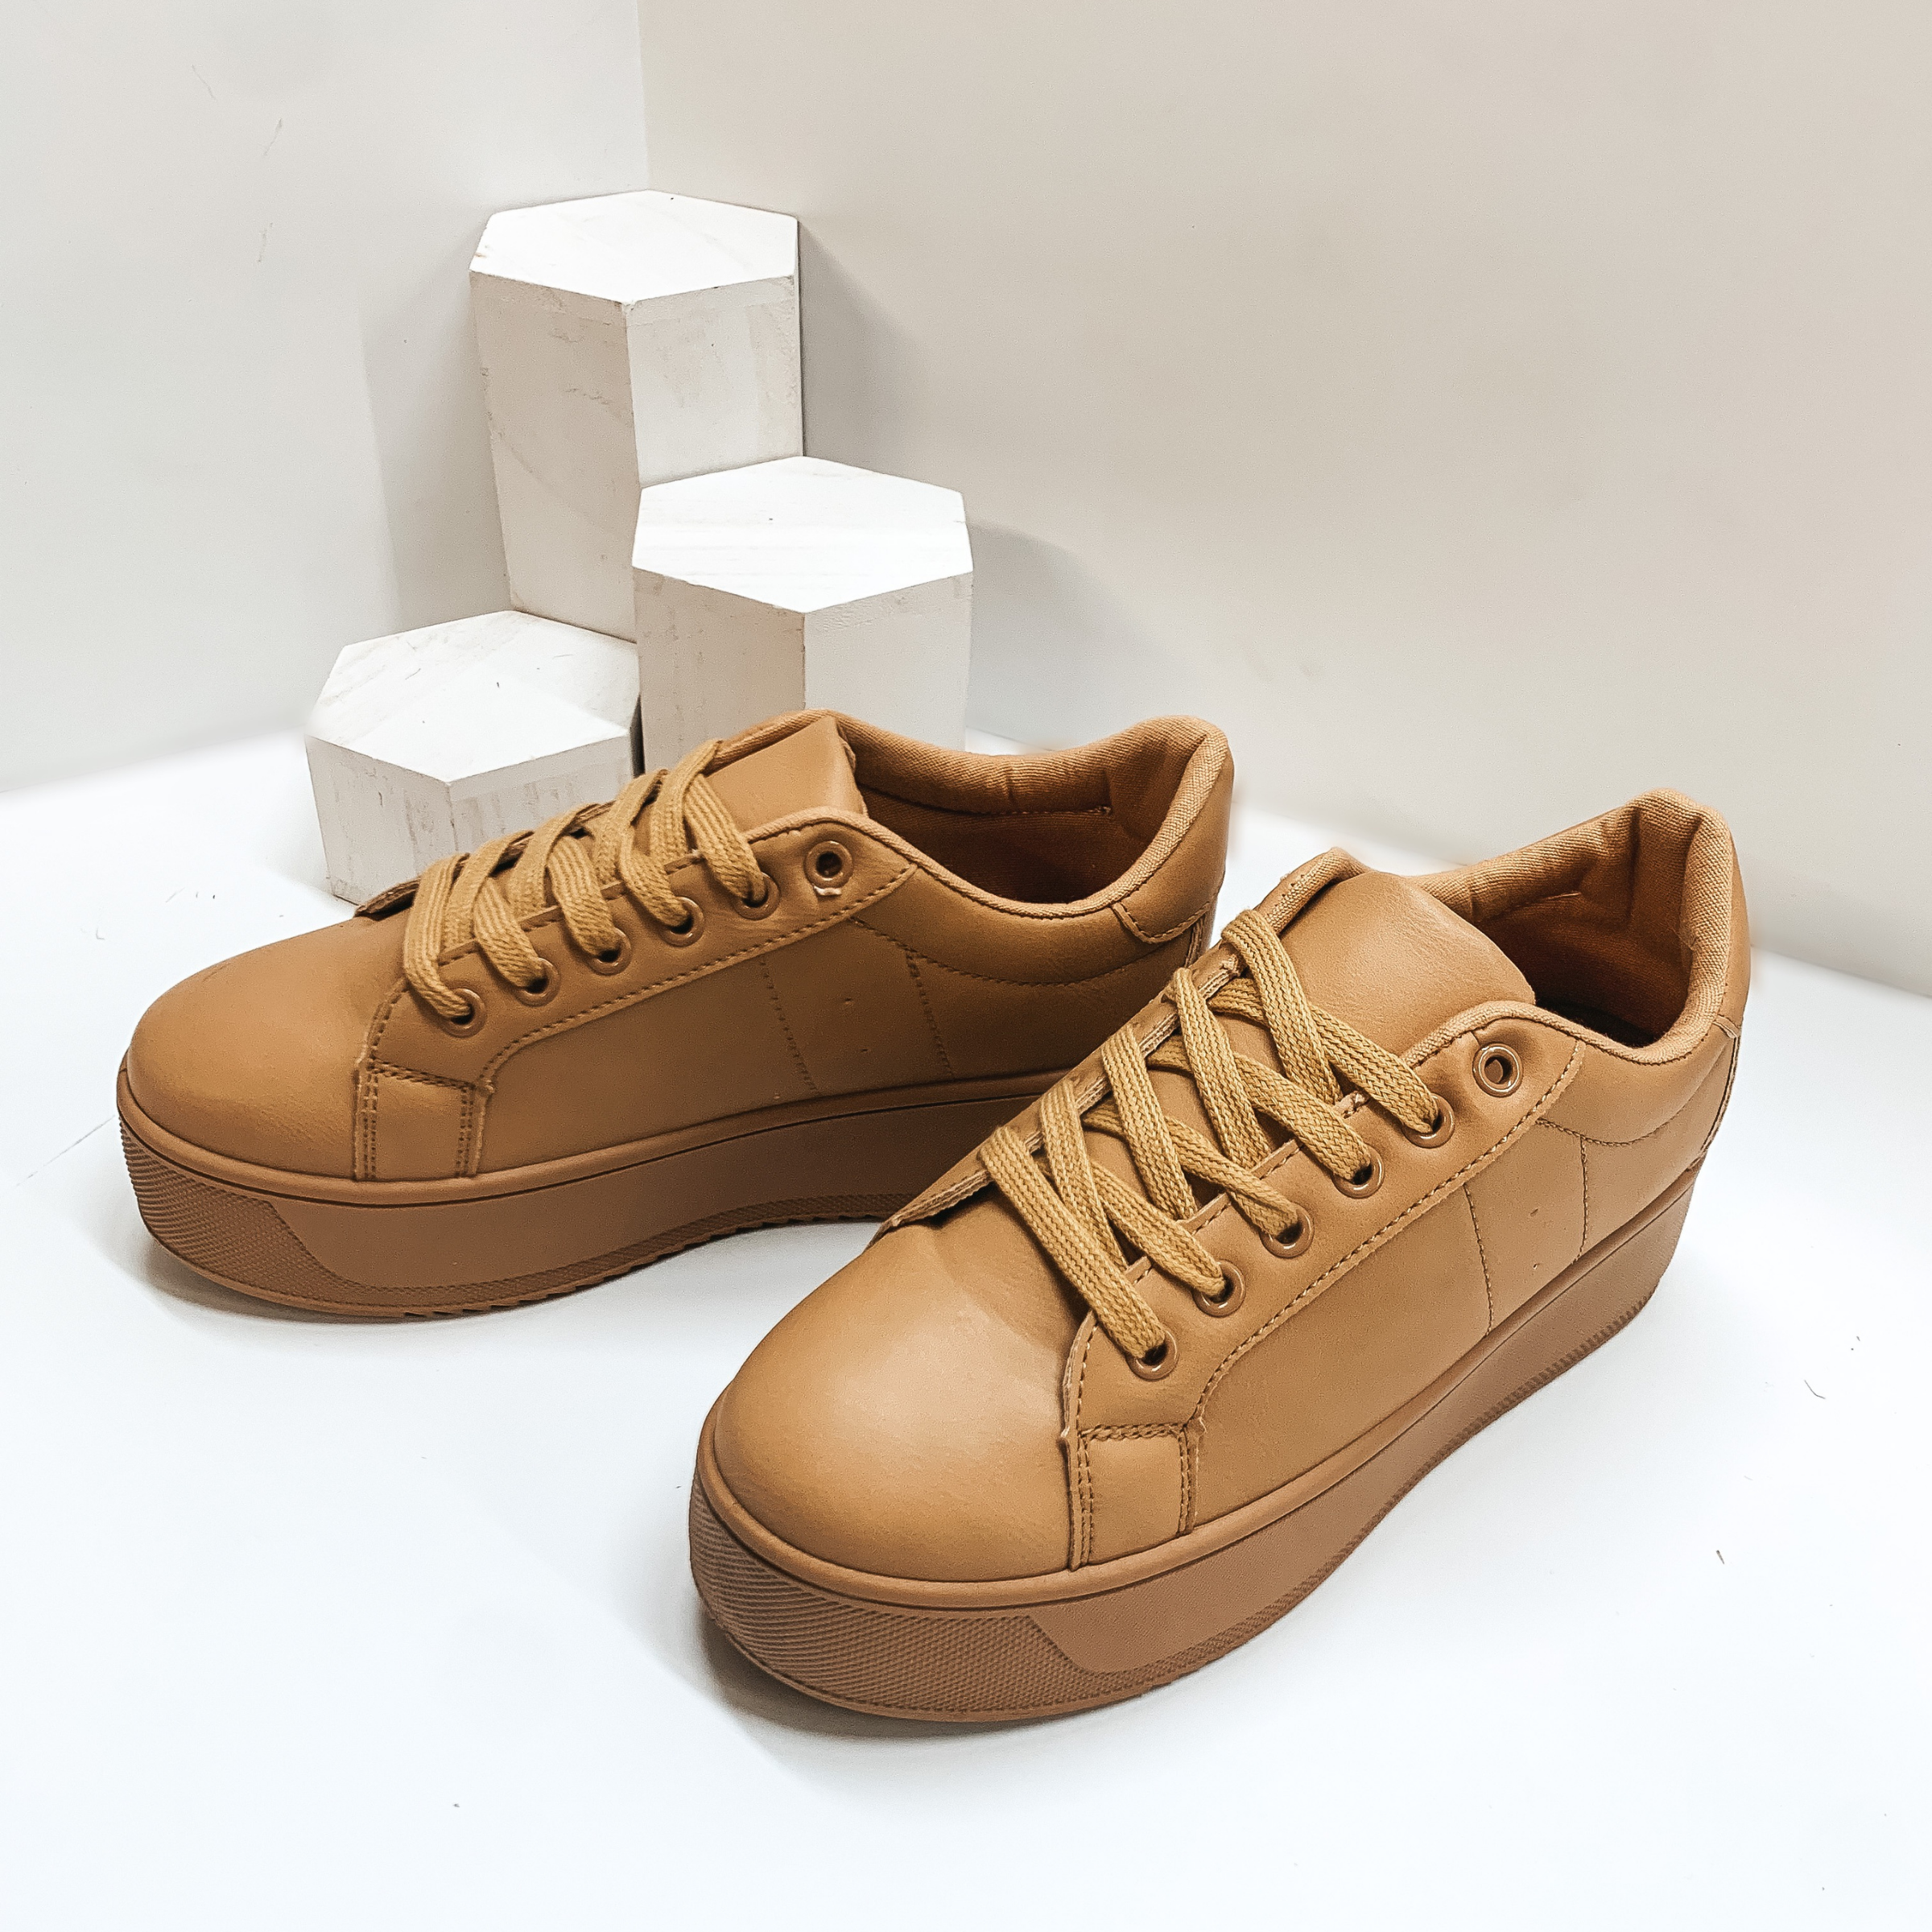 Classic Chic Platform Sneakers in Tan - Giddy Up Glamour Boutique